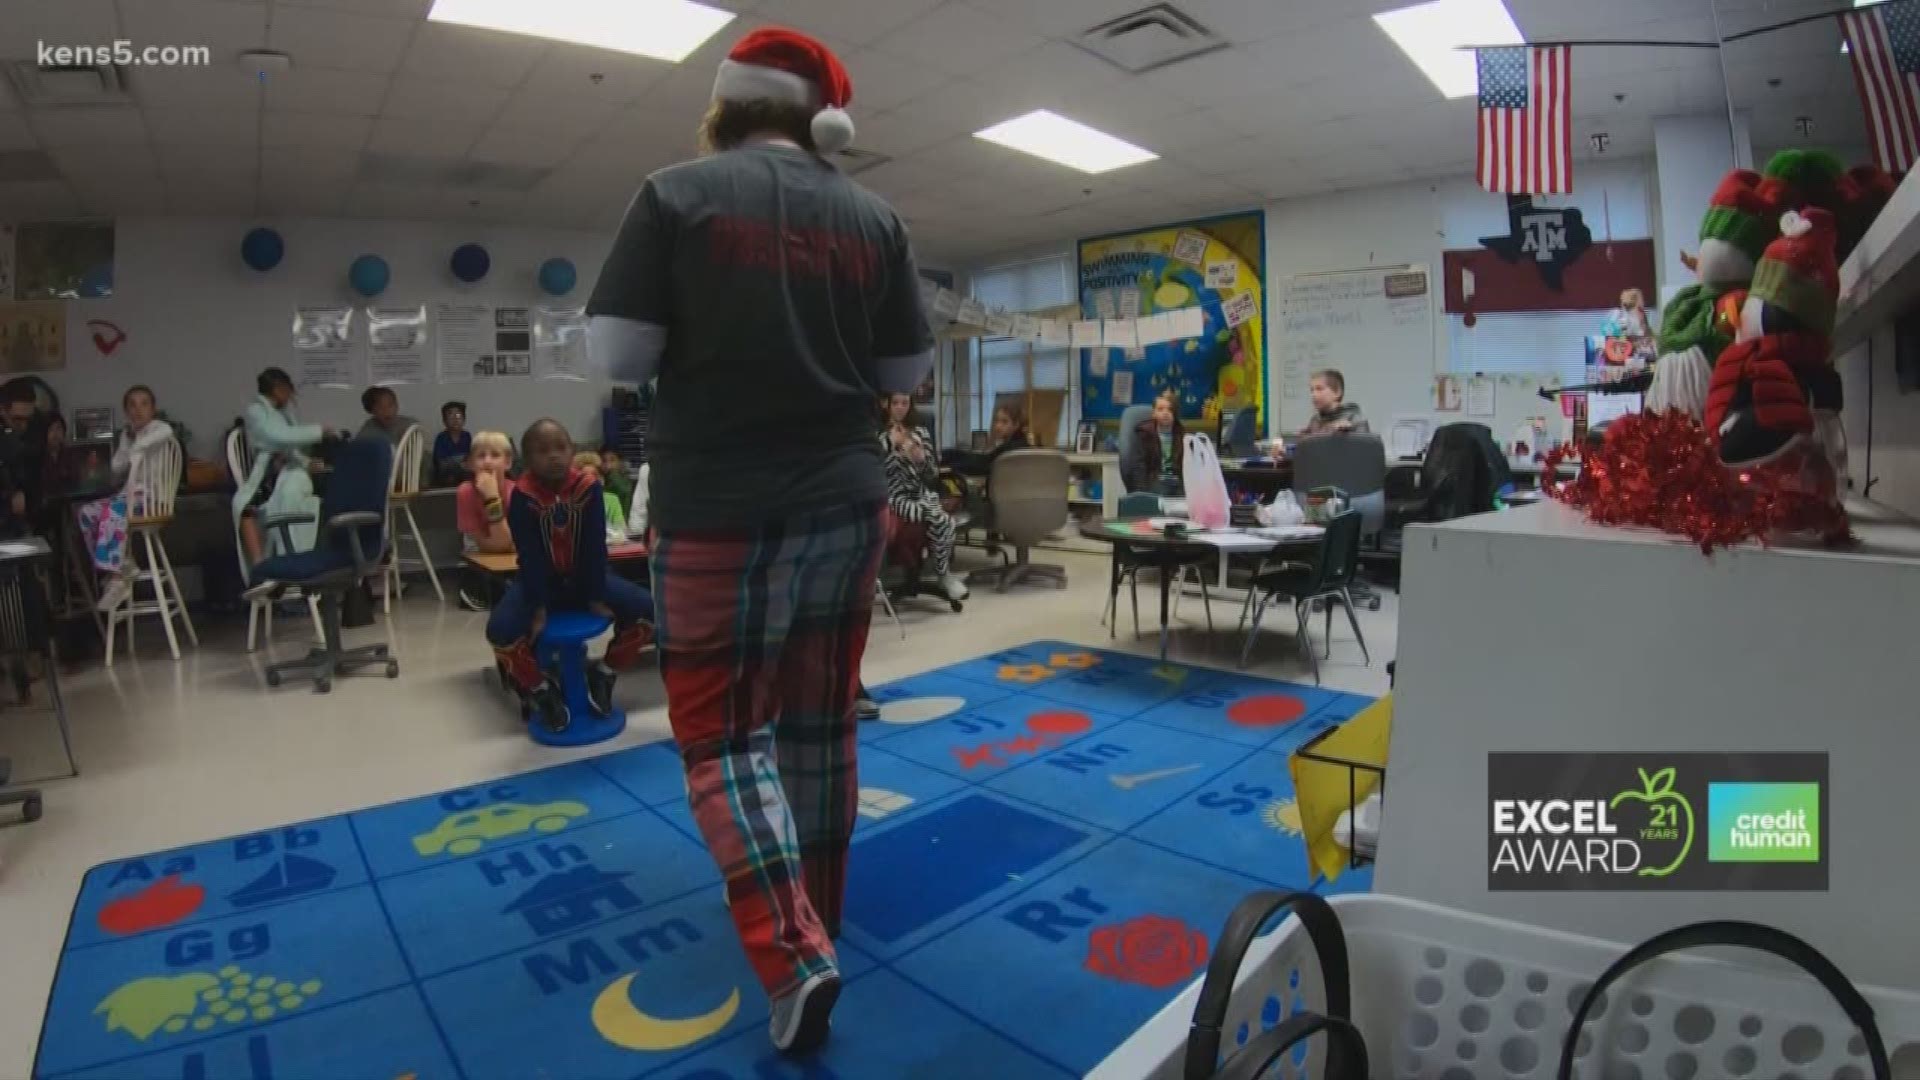 Typically, nothing can top Pajama Day at Watts Elementary School, except for the surprise we planned for one of its teachers.